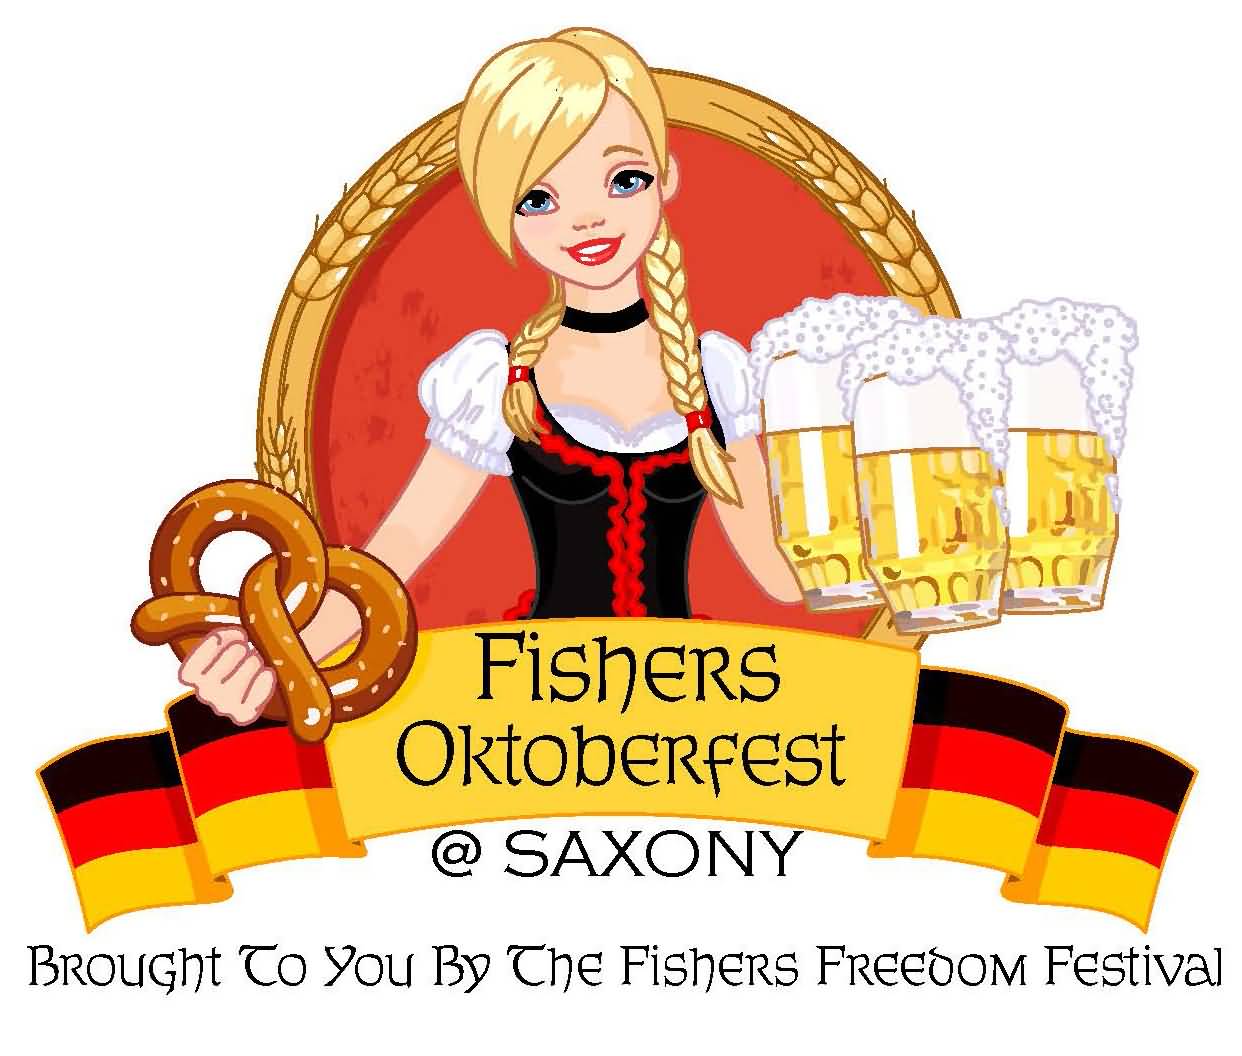 Fishers Oktoberfest Wishes Girl With Beer Mugs Illustration